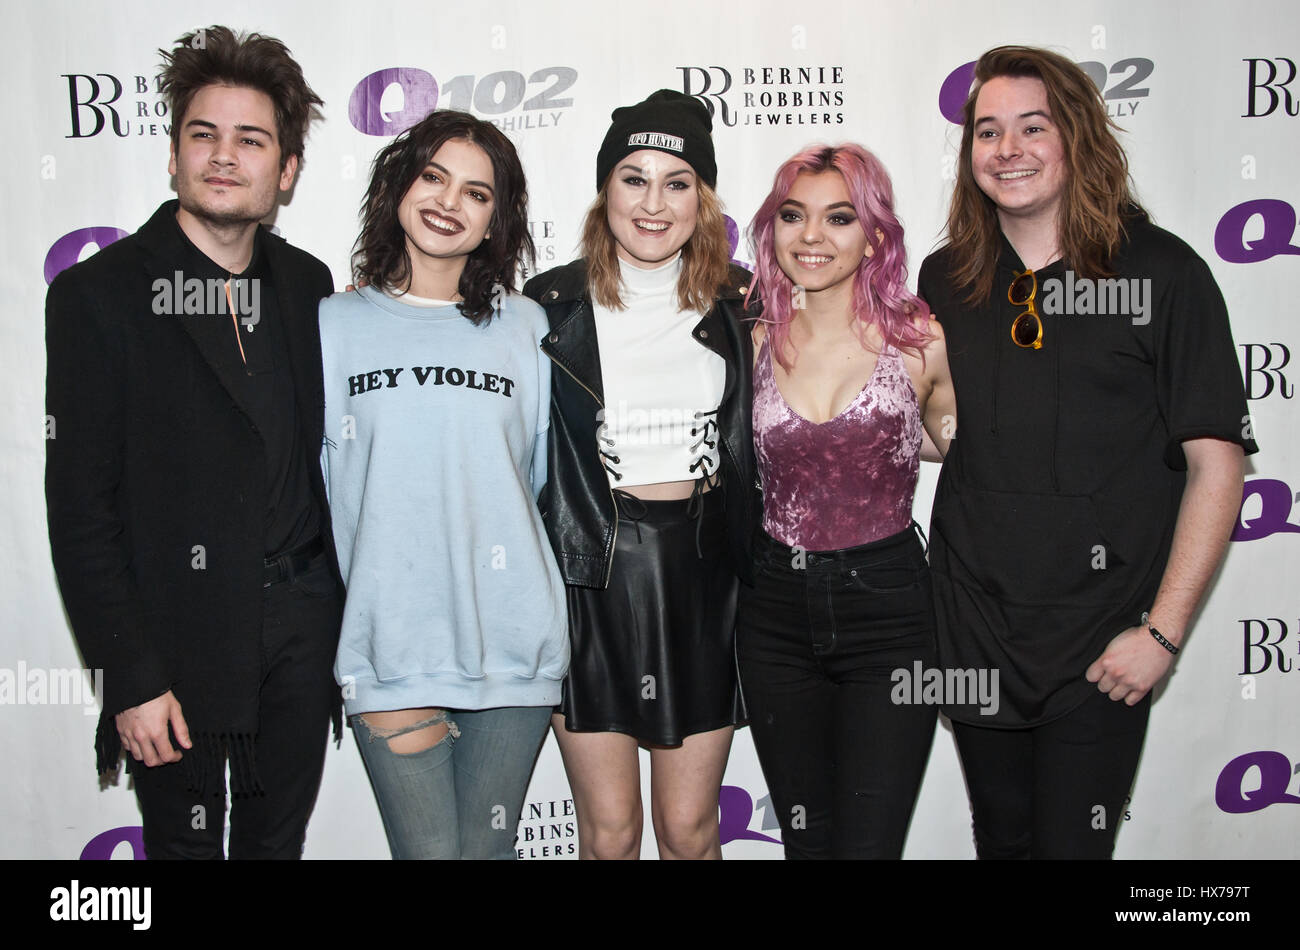 Bala Cynwyd, PA, USA. 23rd March, 2017. American Pop Rock Band Hey Violet Visit Q102's Performance Theatre. Stock Photo